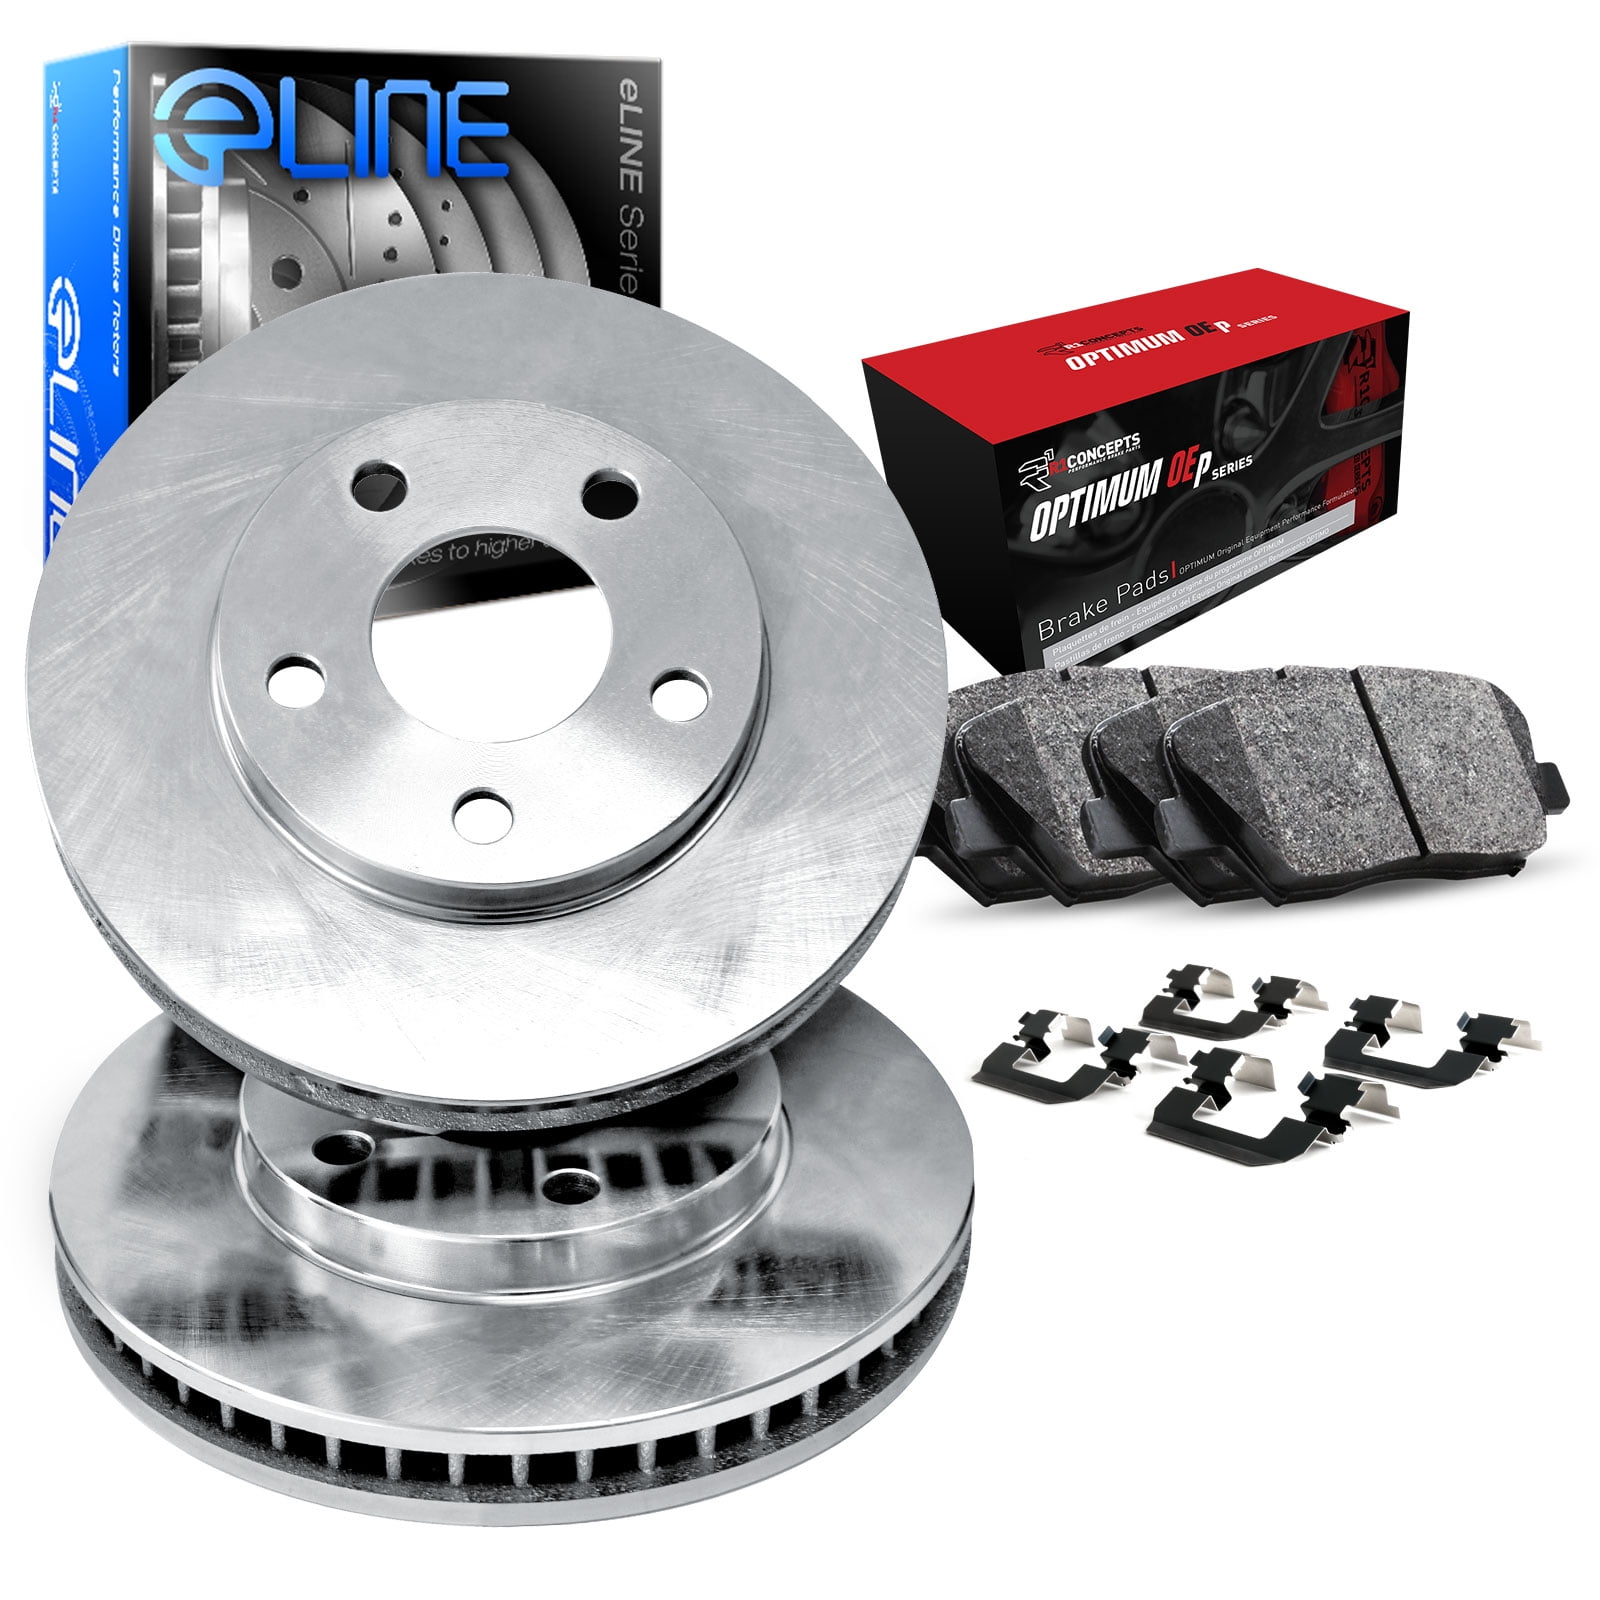 Front Rear Coated Drilled Slotted Disc Brake Rotors Kit For Volkswagen Tiguan CC GTI Passat Audi Q3 A3 Quattro